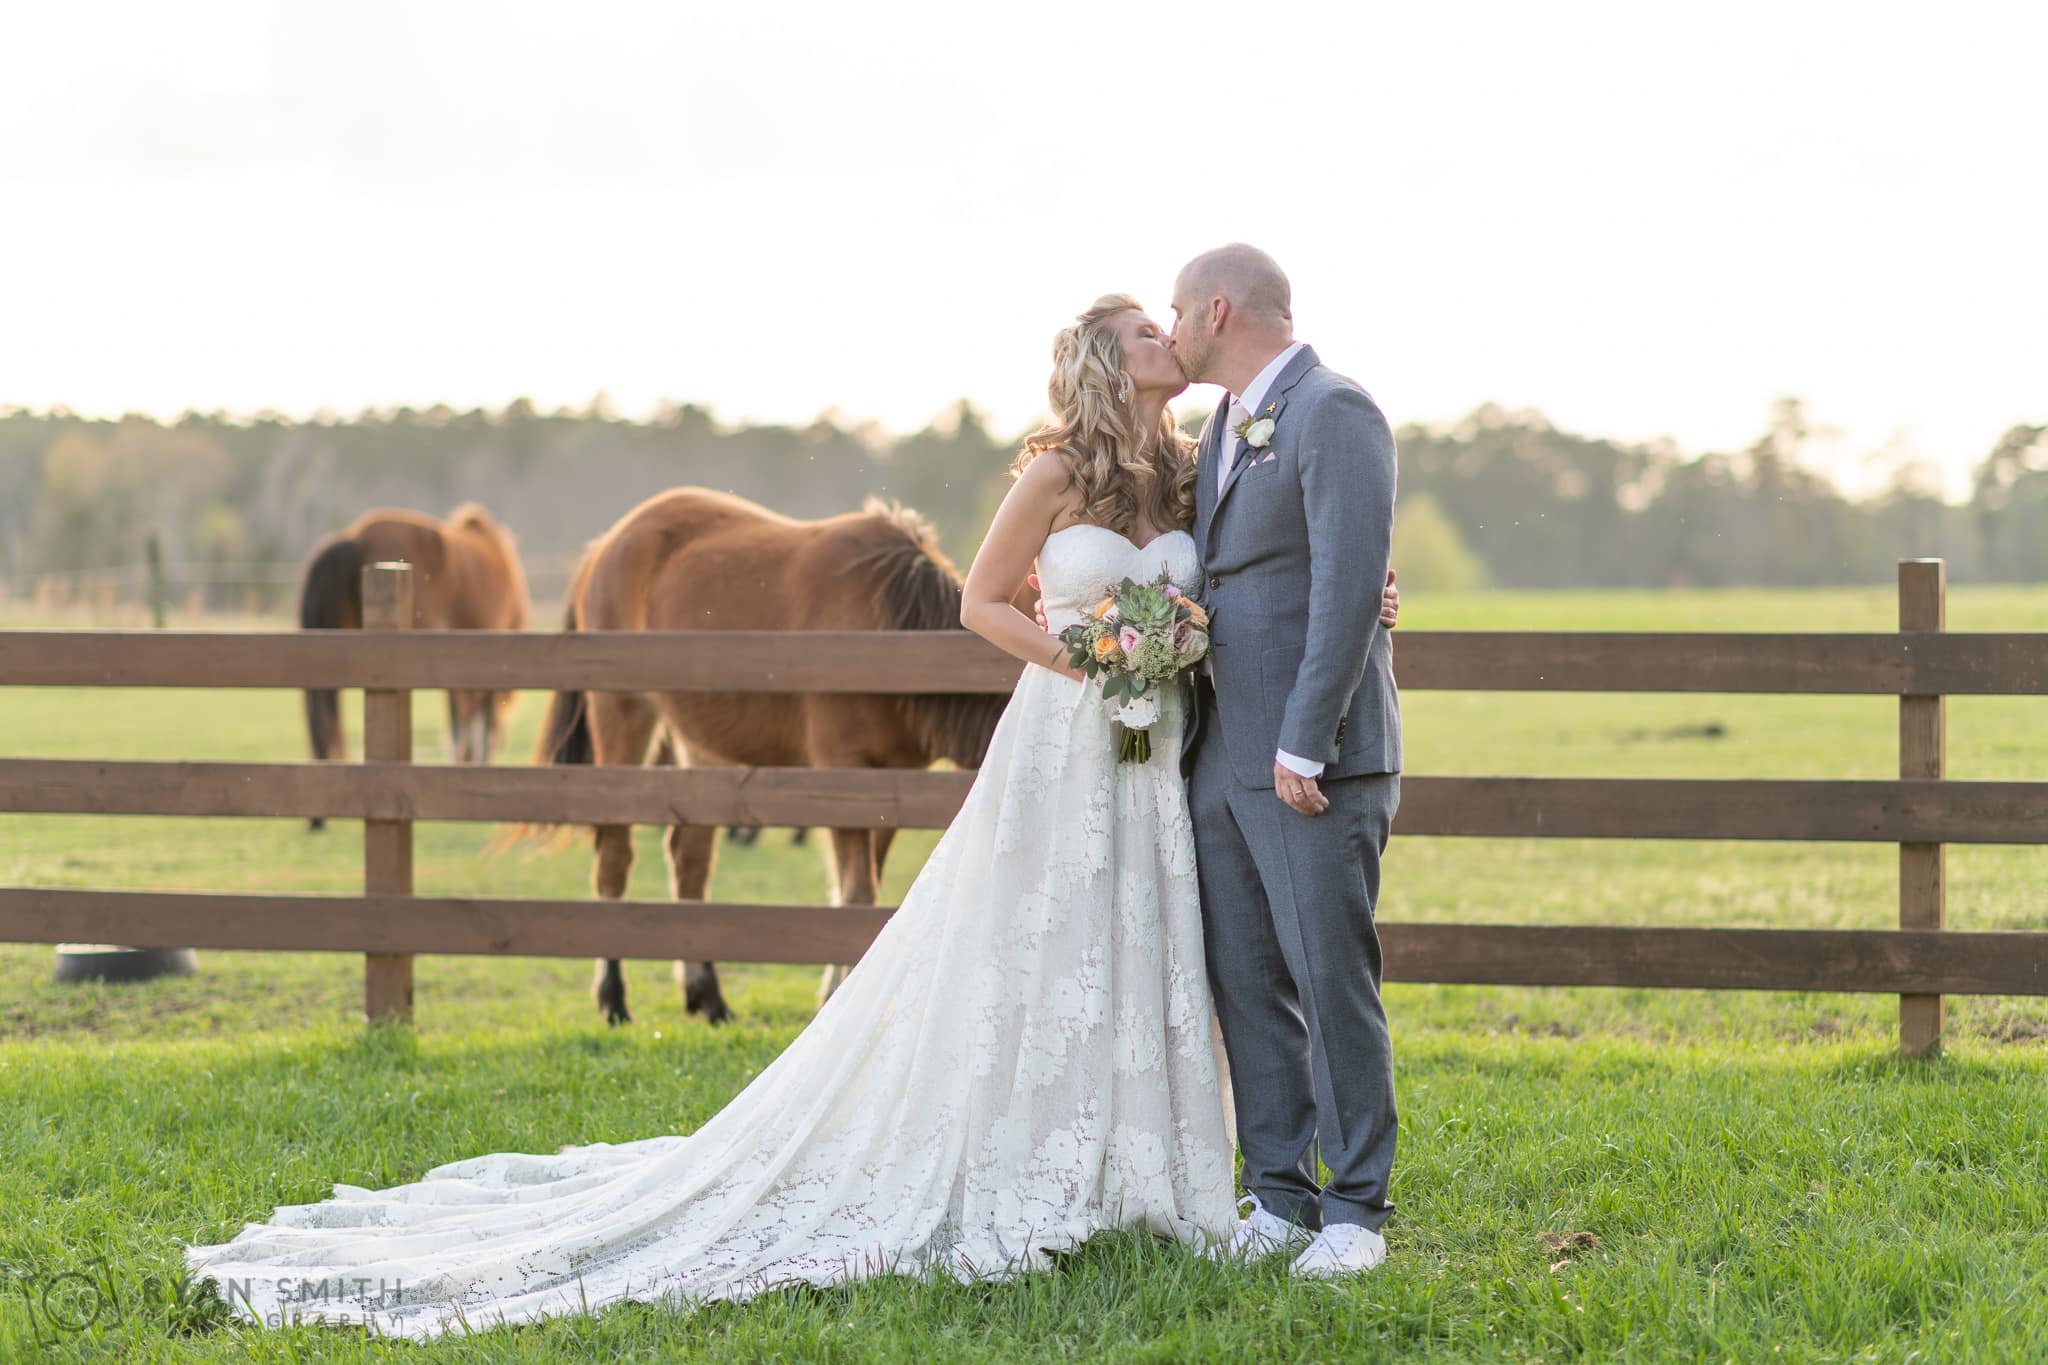 Bride and groom kissing with horses in the background - Wildhorse at Parker Farms